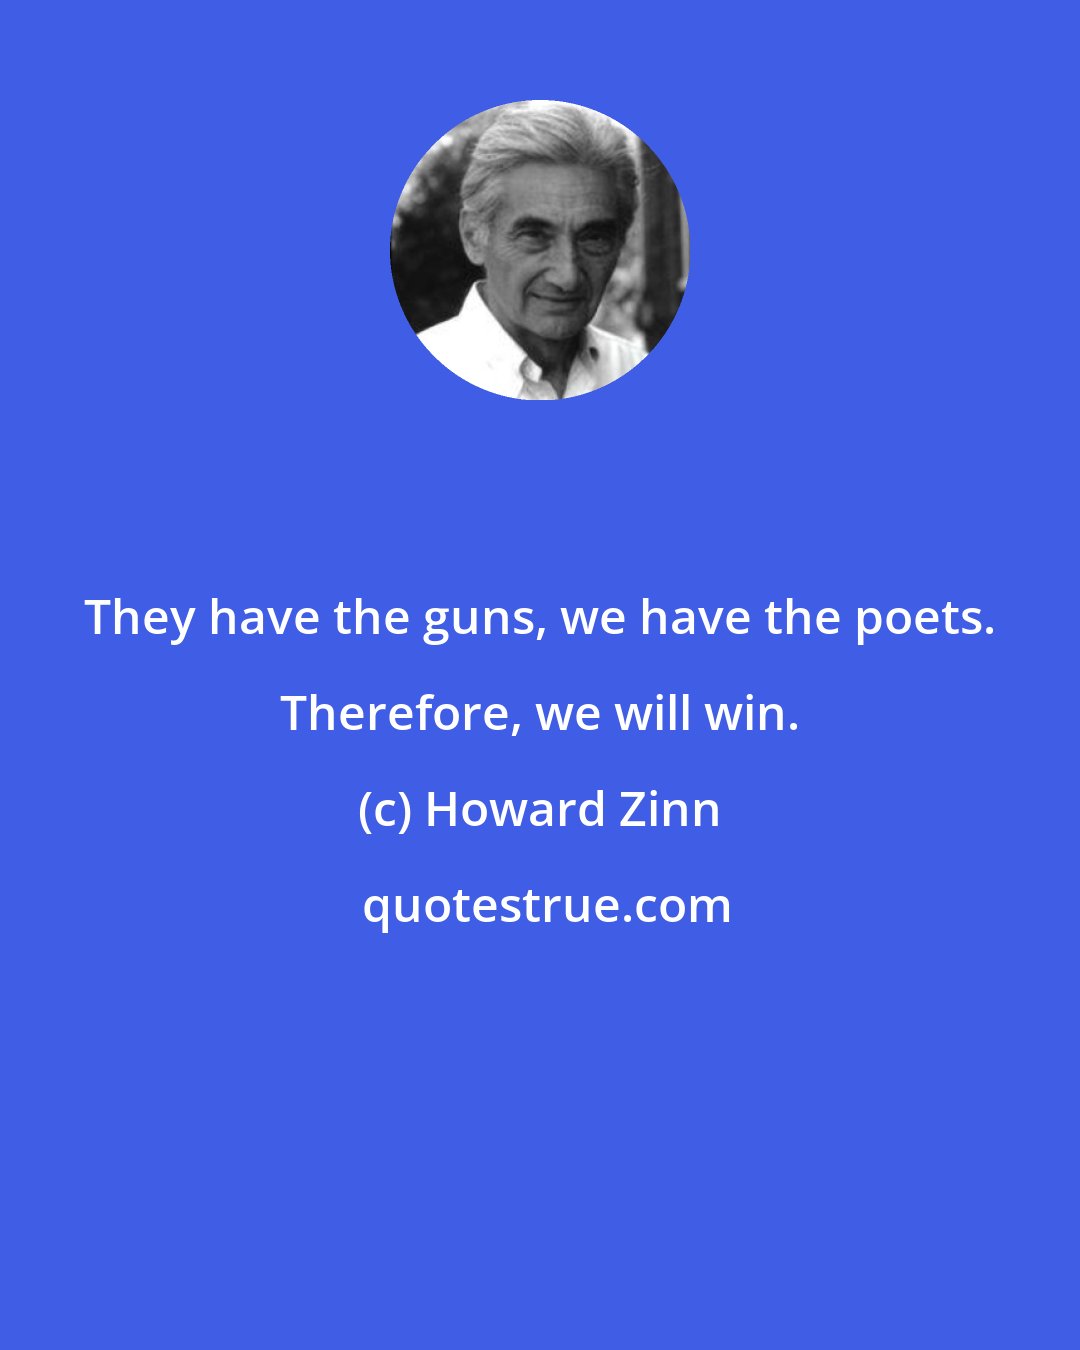 Howard Zinn: They have the guns, we have the poets. Therefore, we will win.